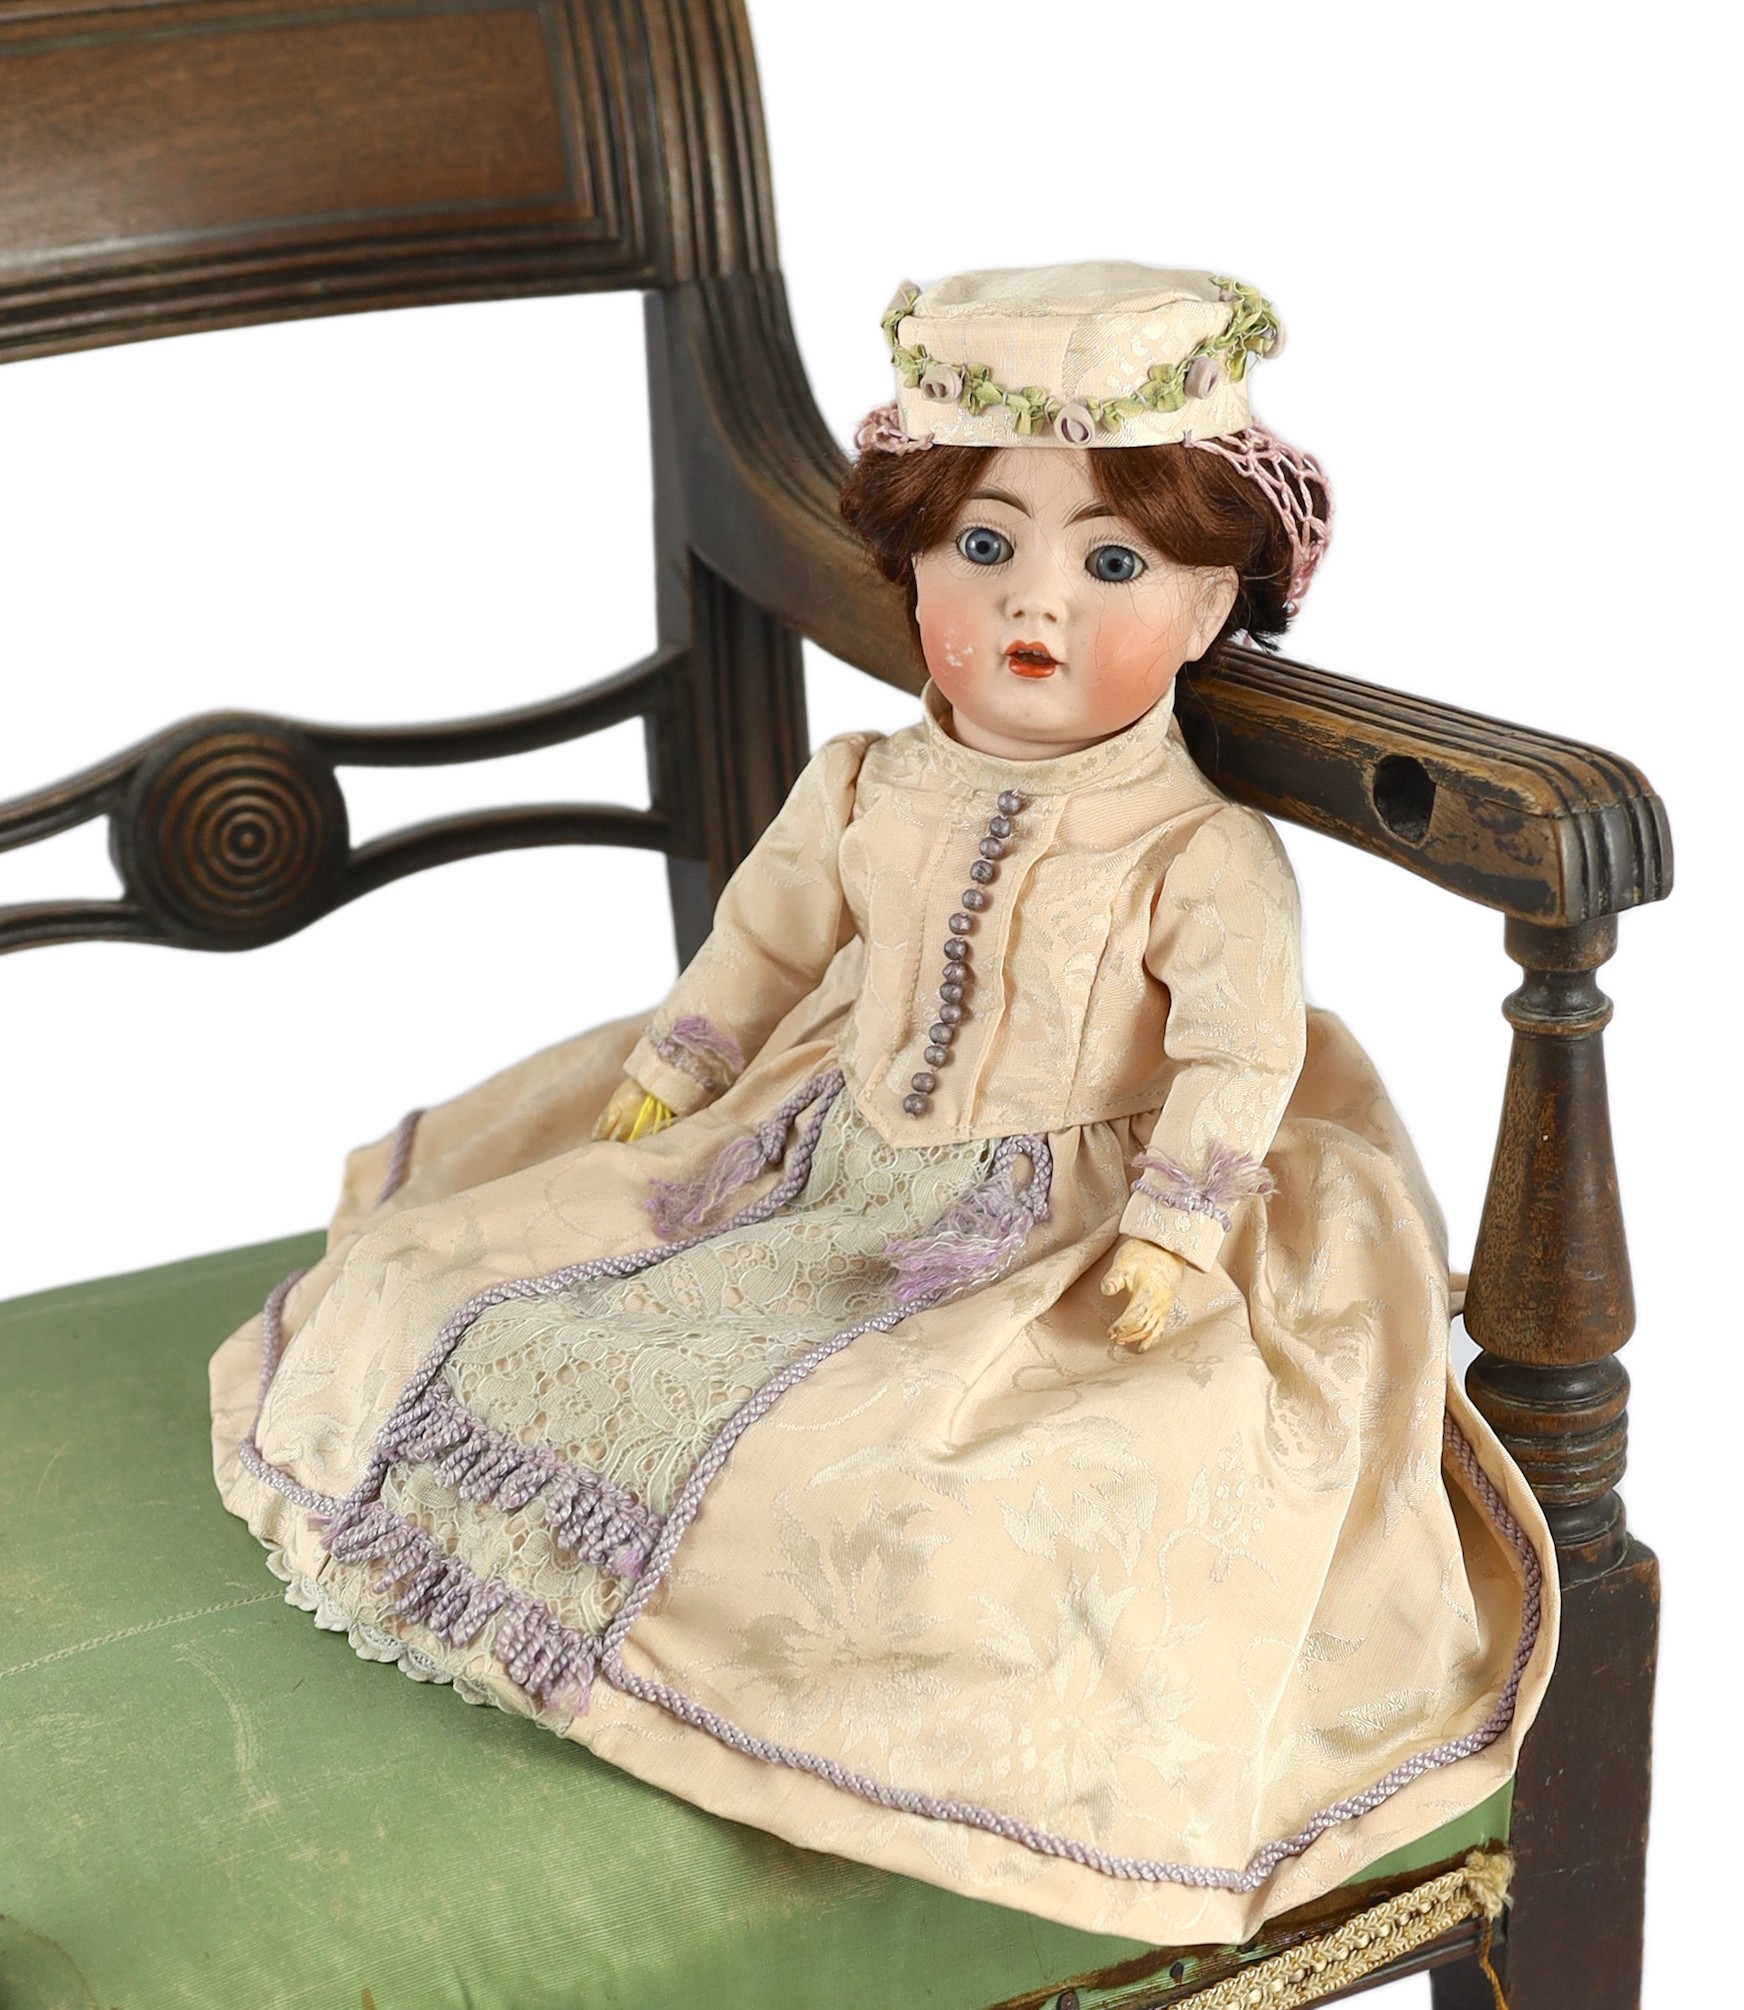 A Kammer & Reinhardt / Simon & Halbig bisque character doll, German, circa 1911, 13in. Please note the chair is for display purposes only.                                                                                  